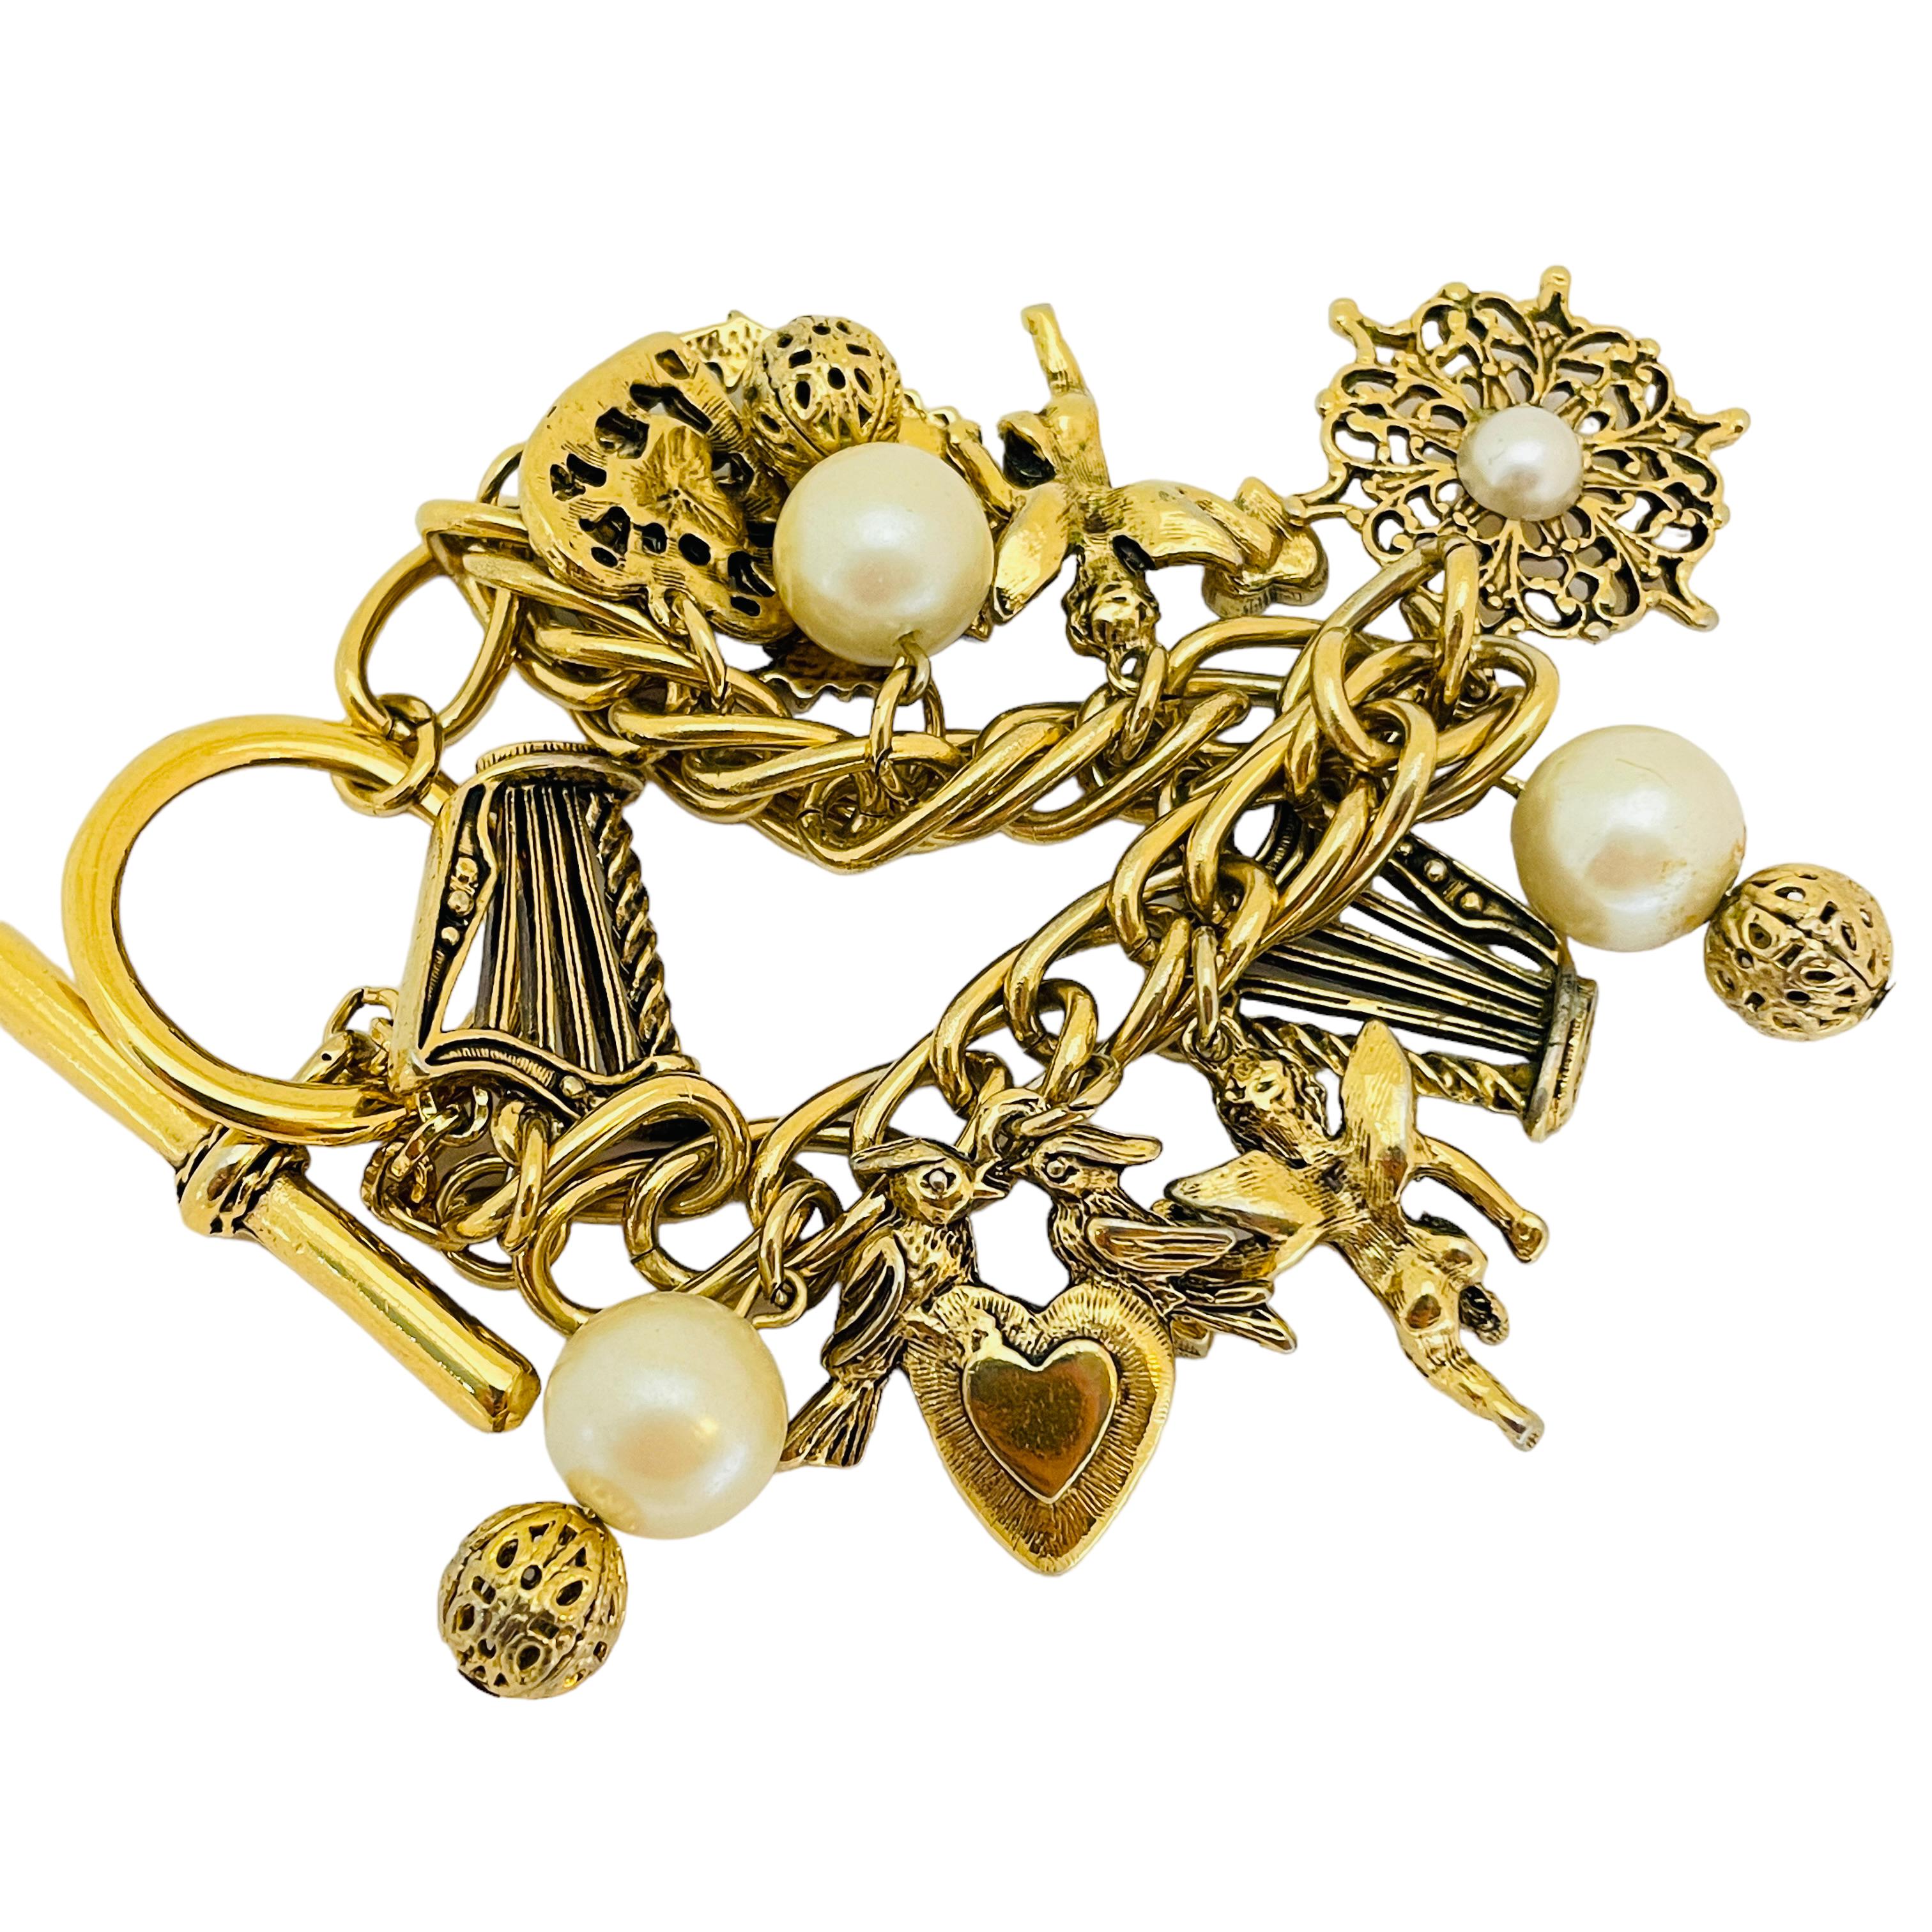 Vintage gold tone pearl charm chain link bracelet In Good Condition For Sale In Palos Hills, IL